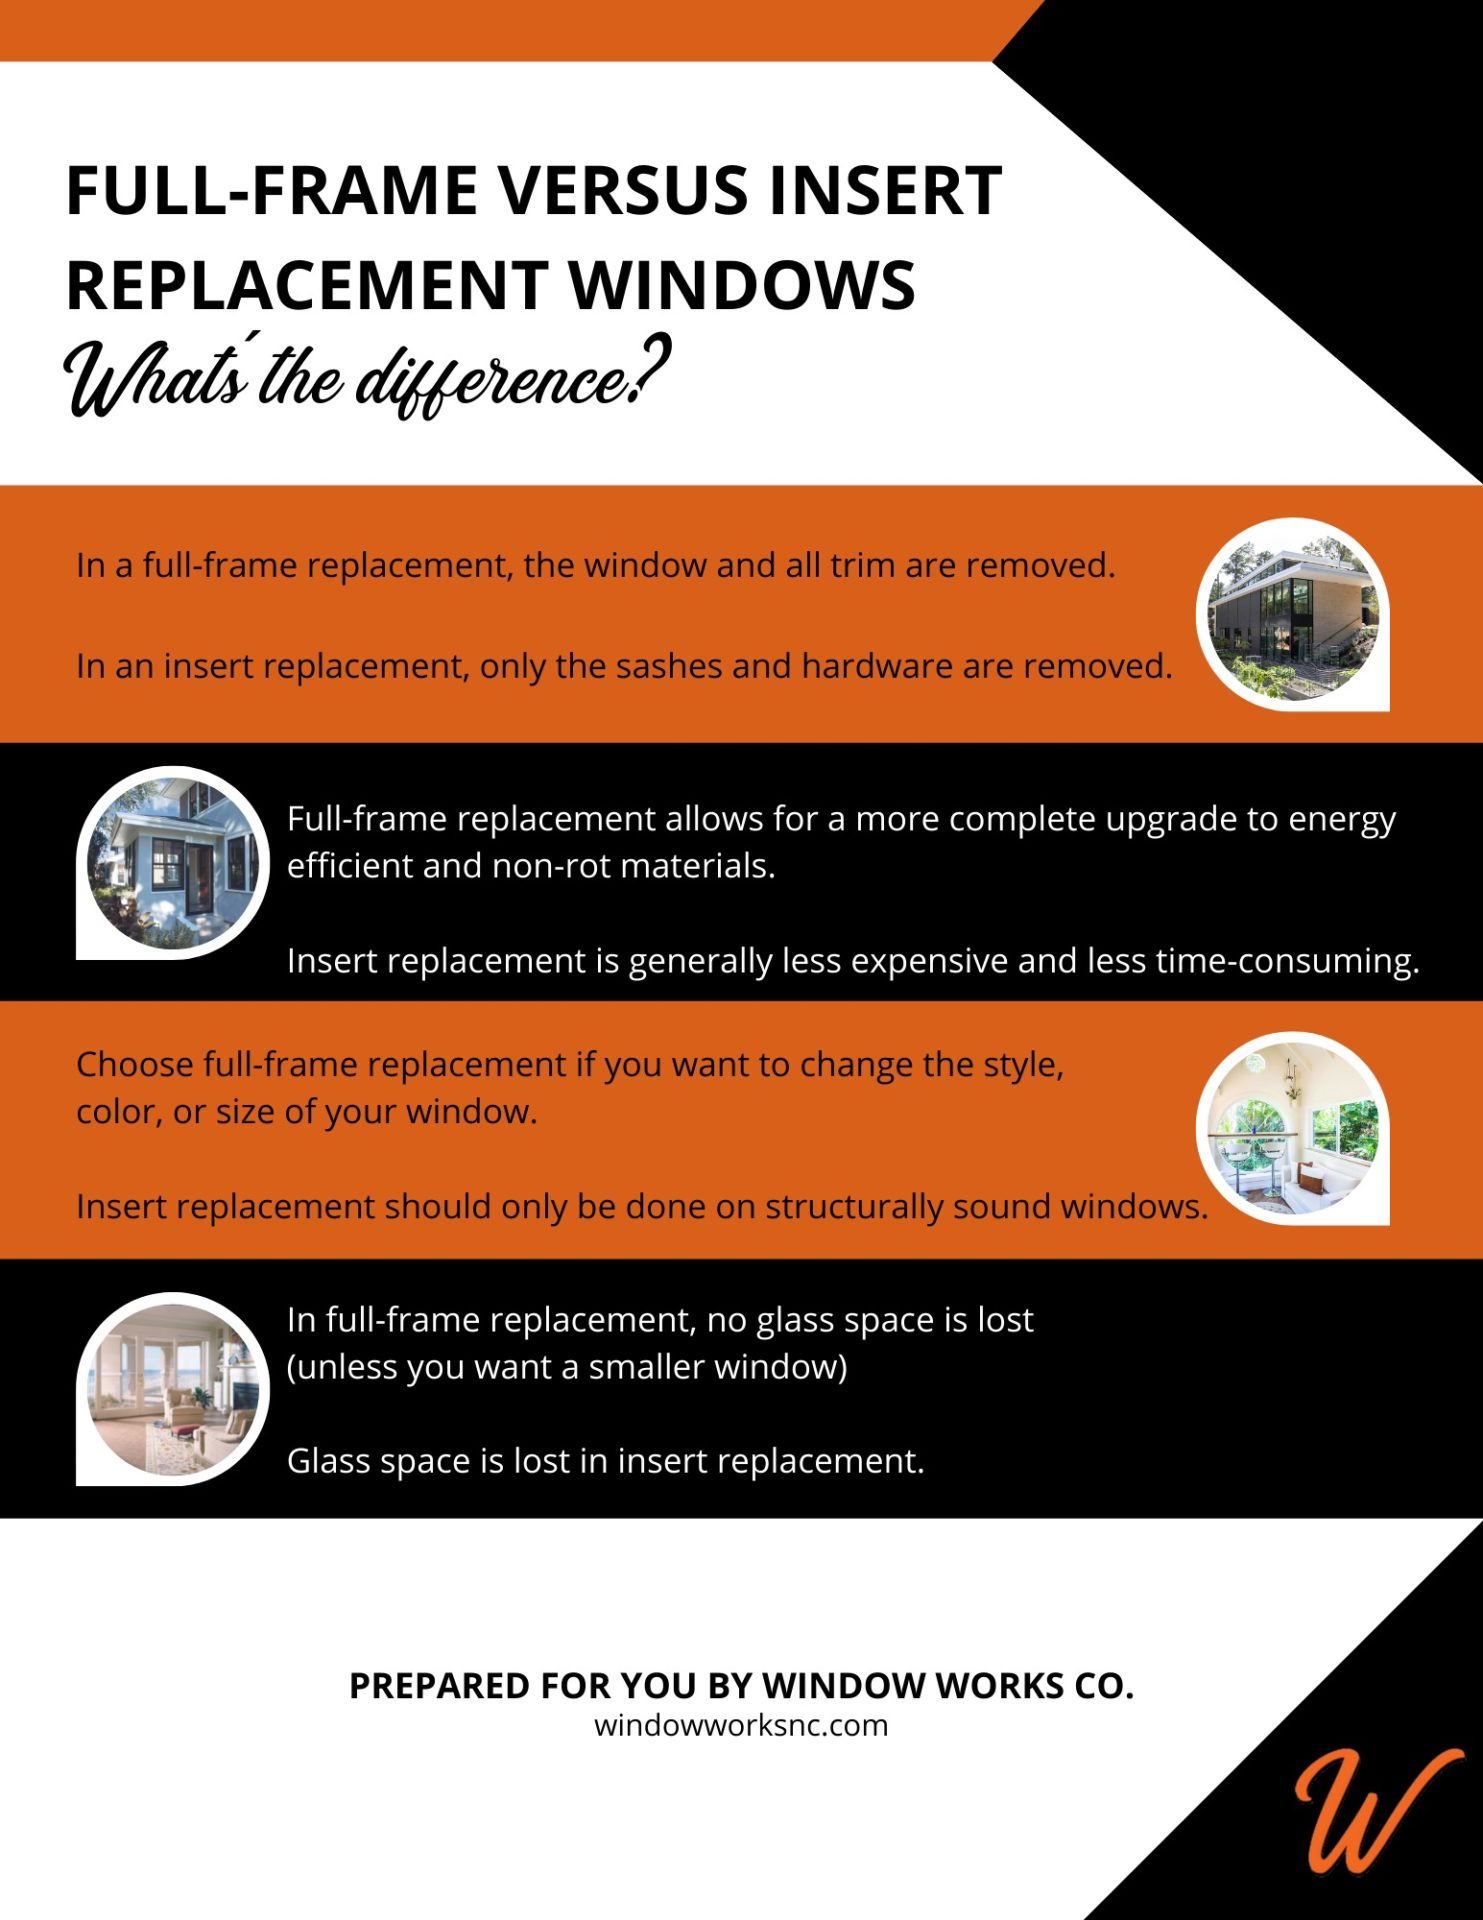 Printable guide comparing full frame versus insert replacement windows